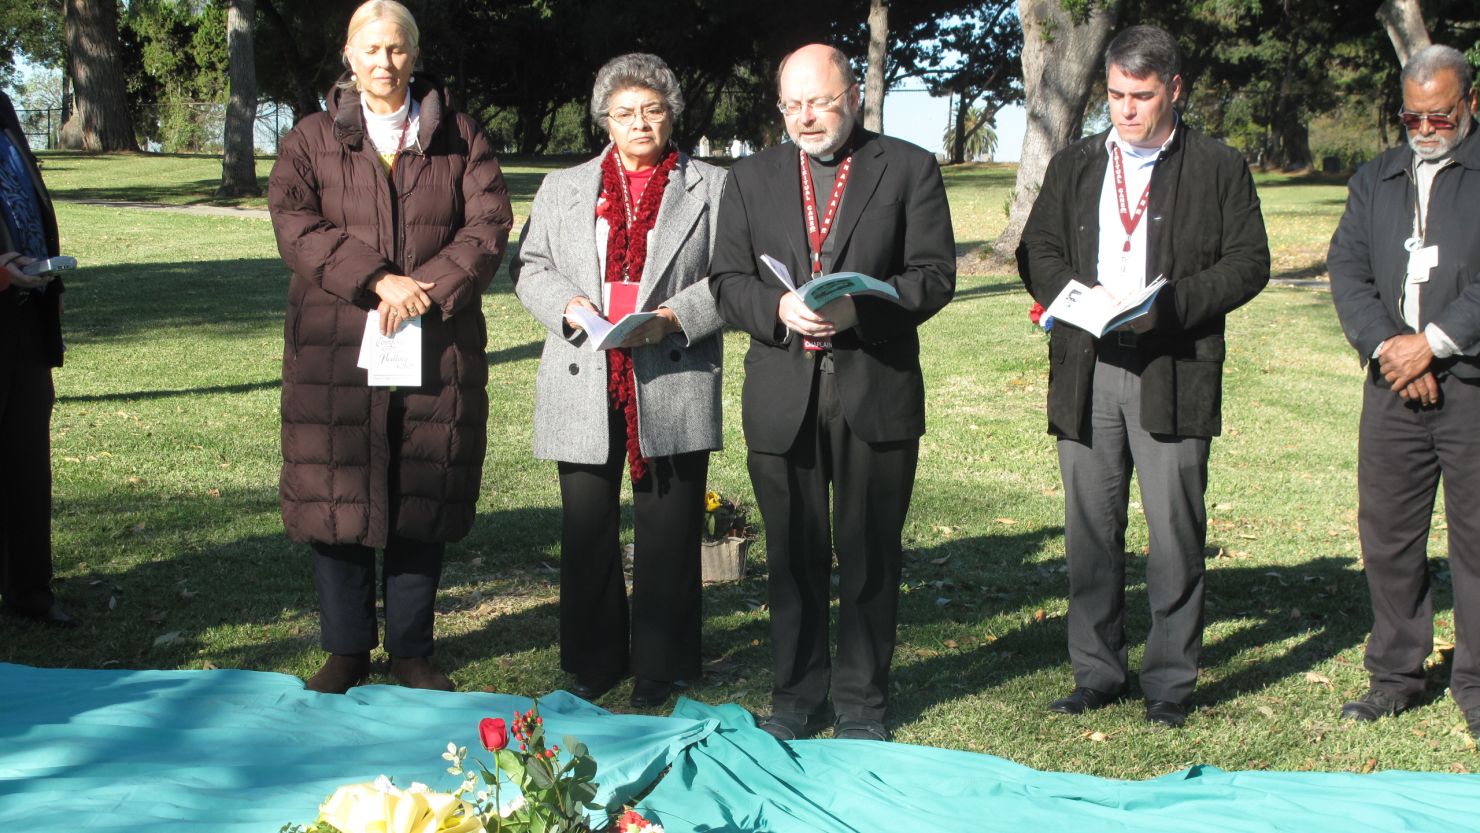 Clergy members offer blessings Wednesday for the unclaimed, cremated remains of 1,639 people who died in 2008.